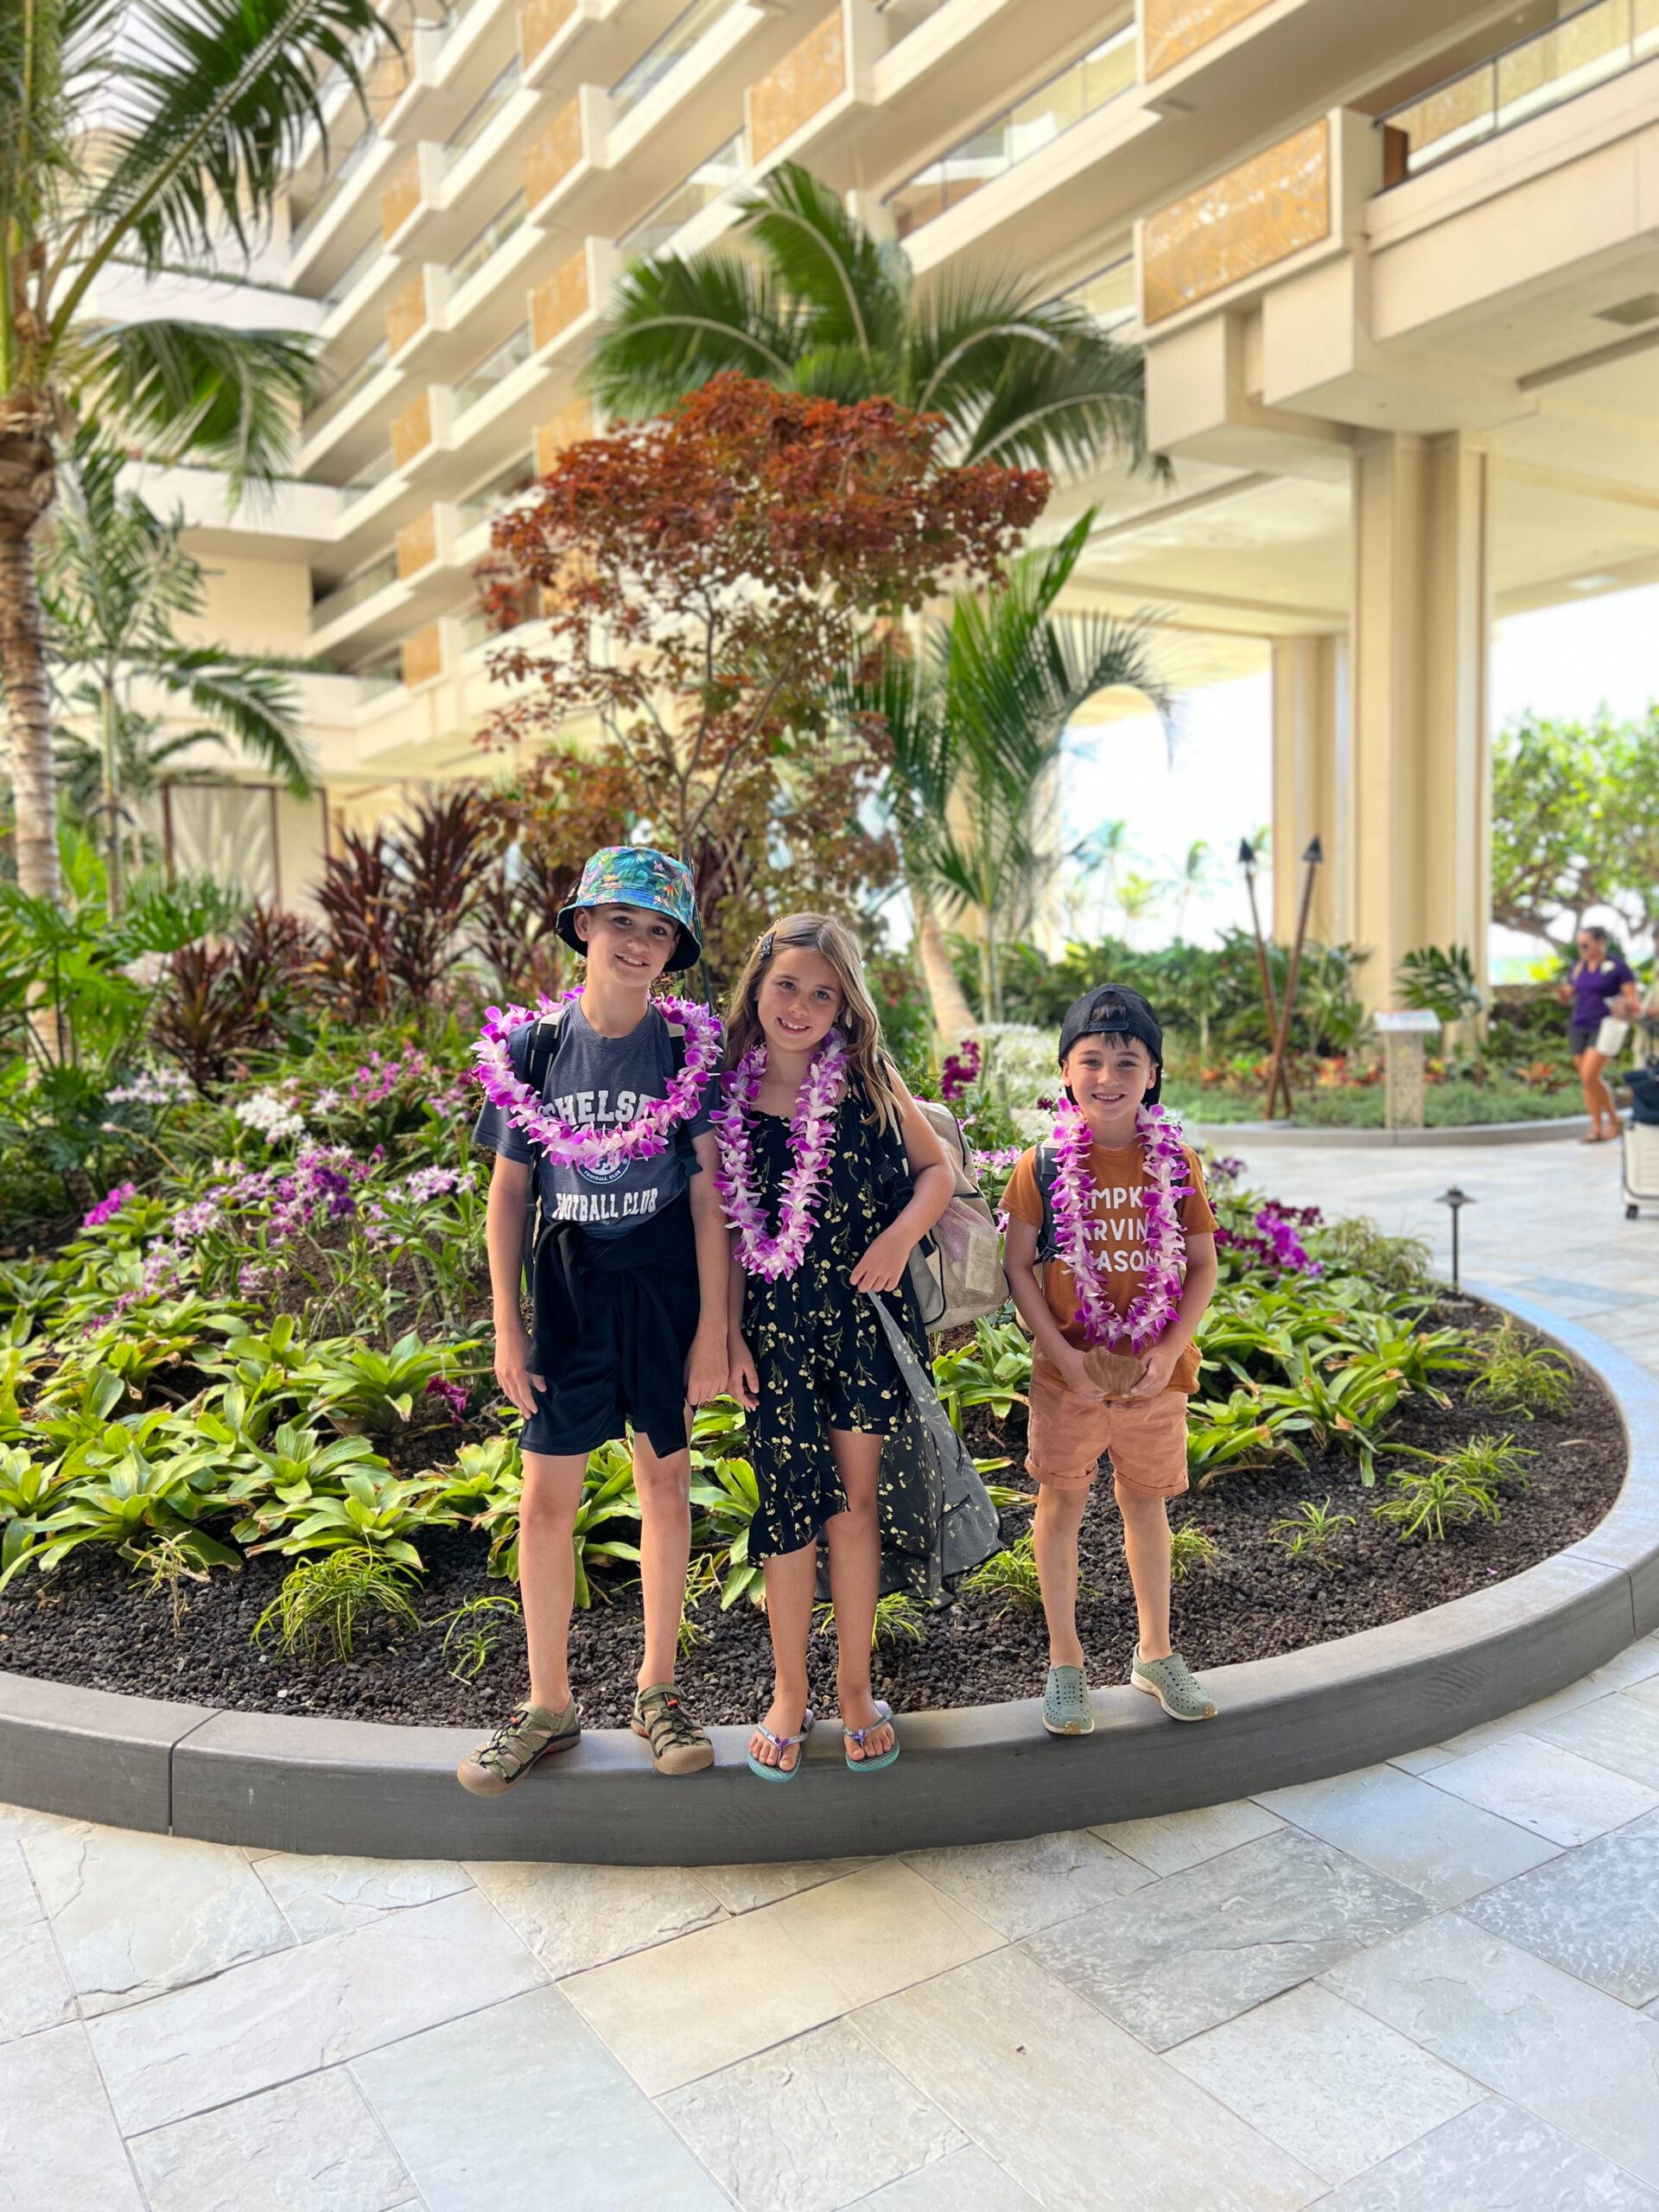 inside the hyatt regency in maui, hawaii. we loved this property for our family vacation!